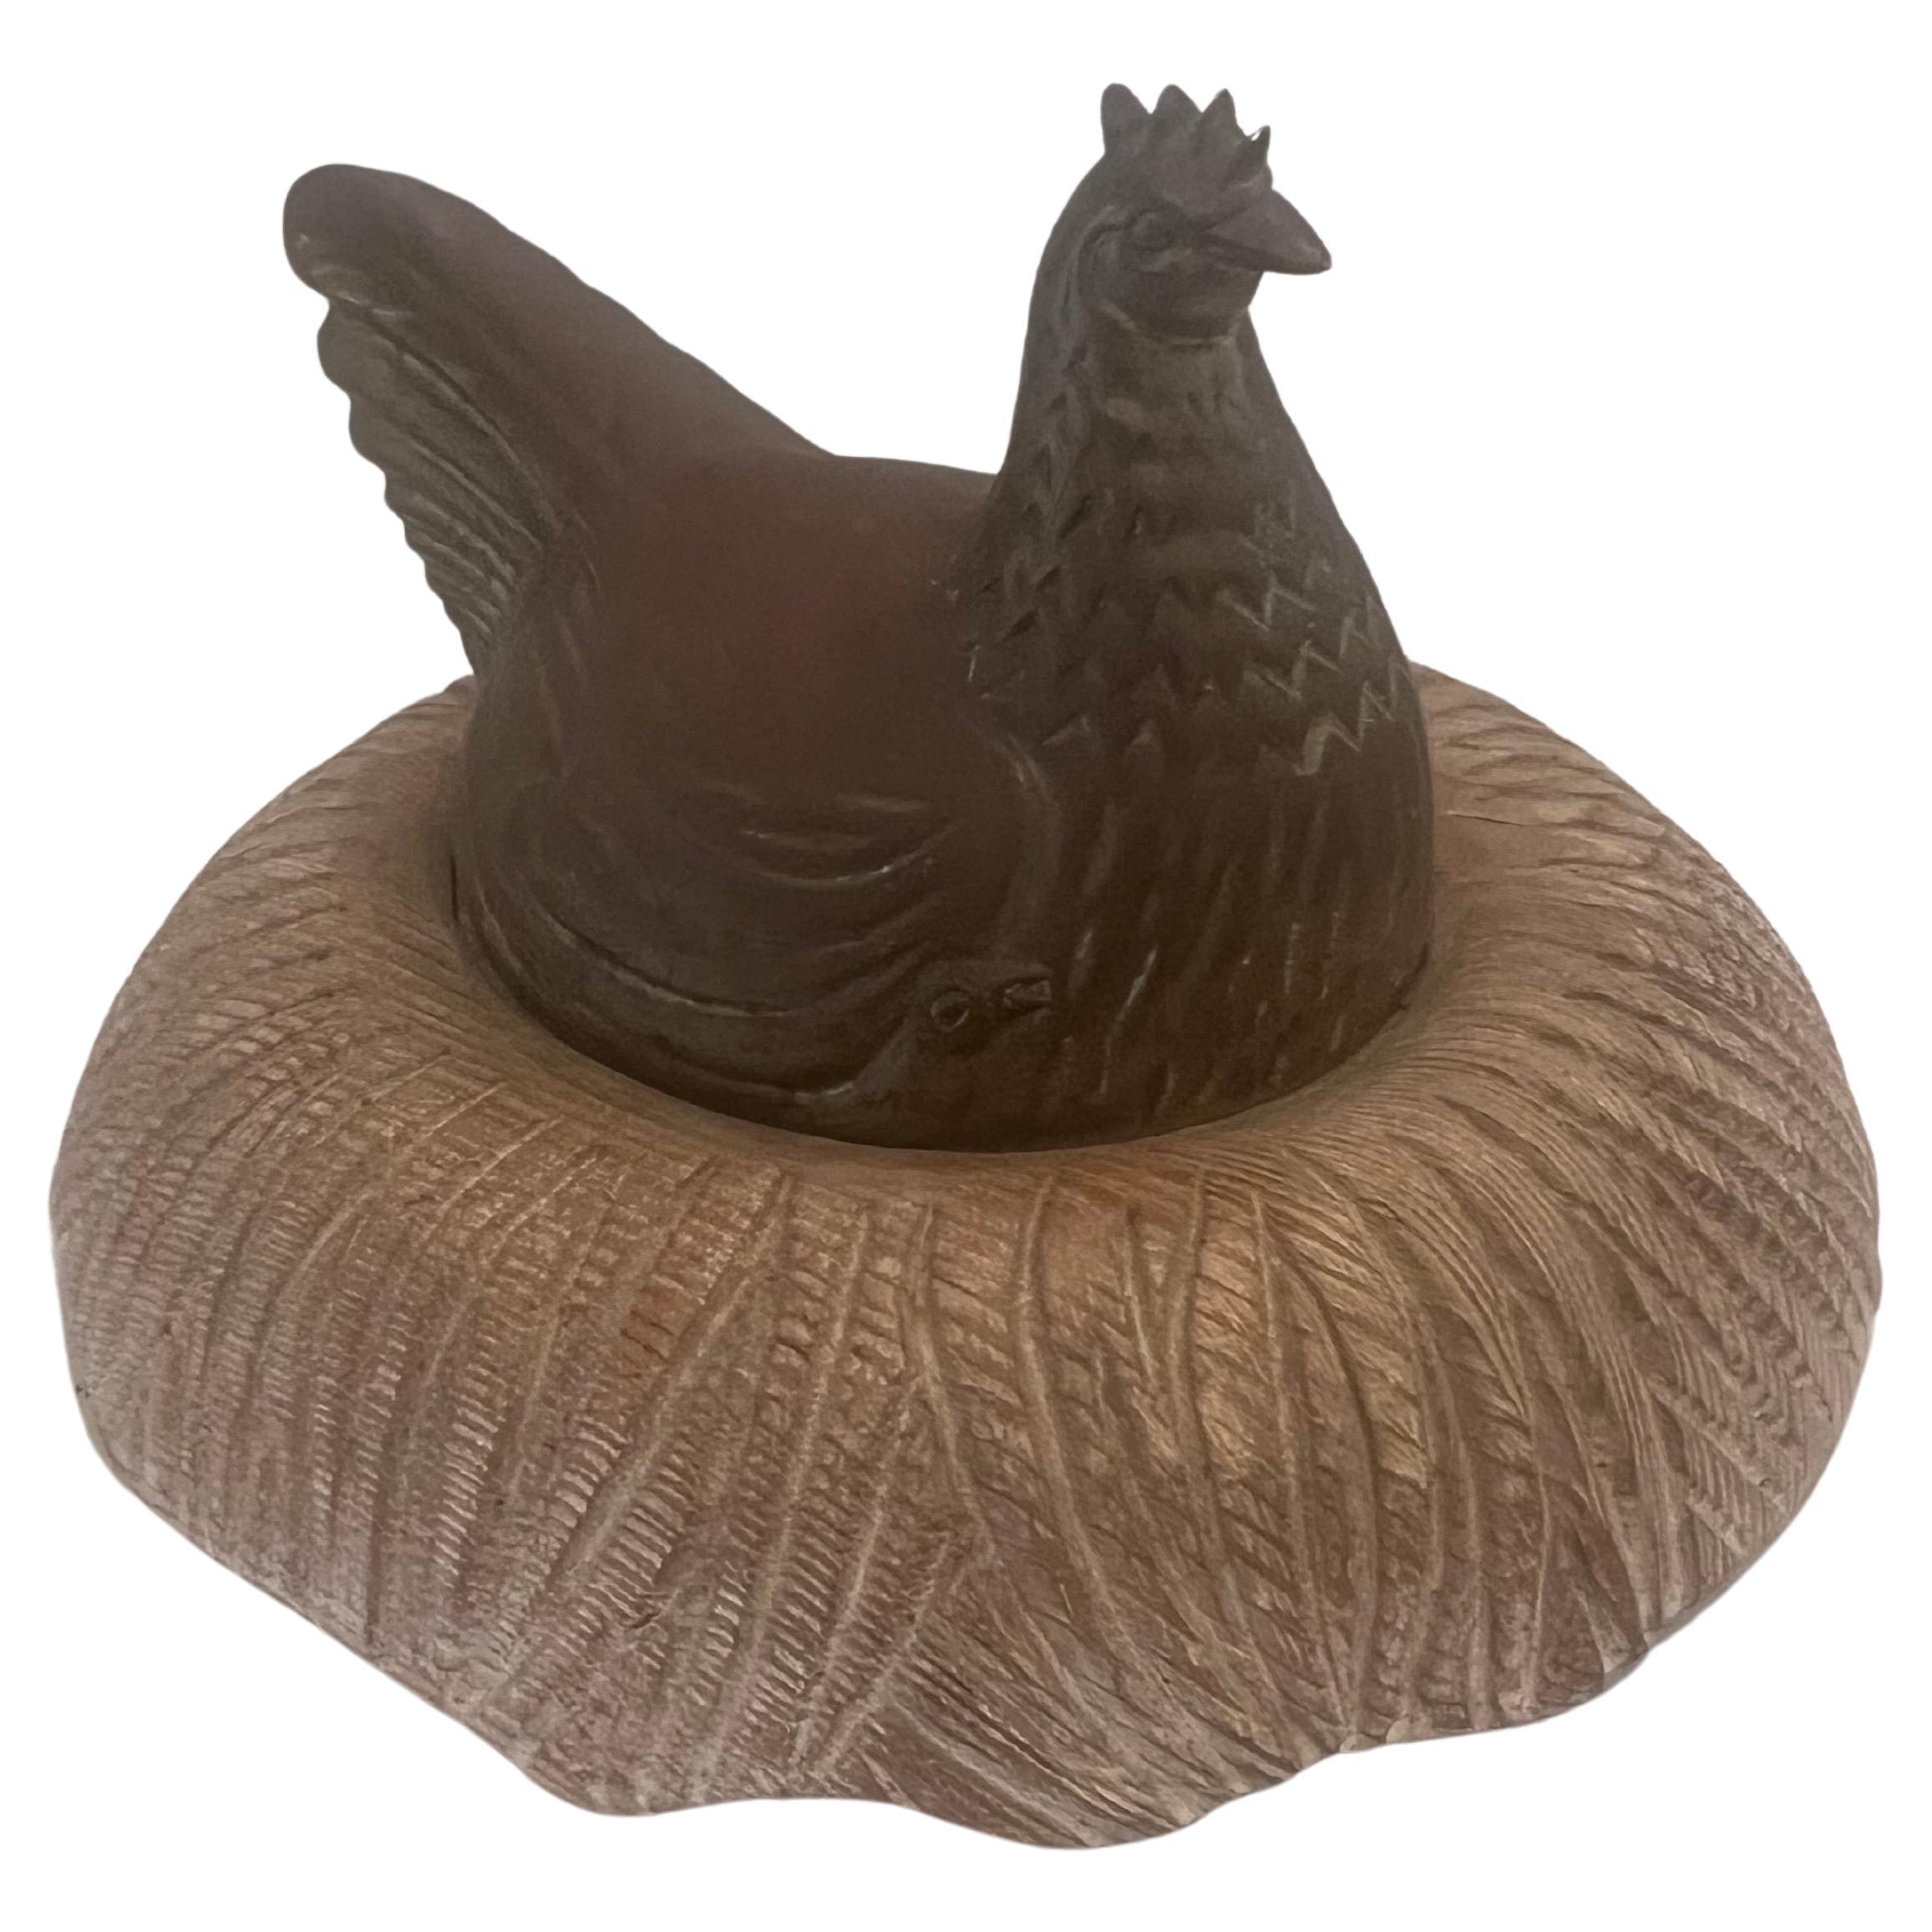 Decorative Rare Patinated Brass on Wood Hen Sculpture by Sarreid LTD In Good Condition For Sale In San Diego, CA